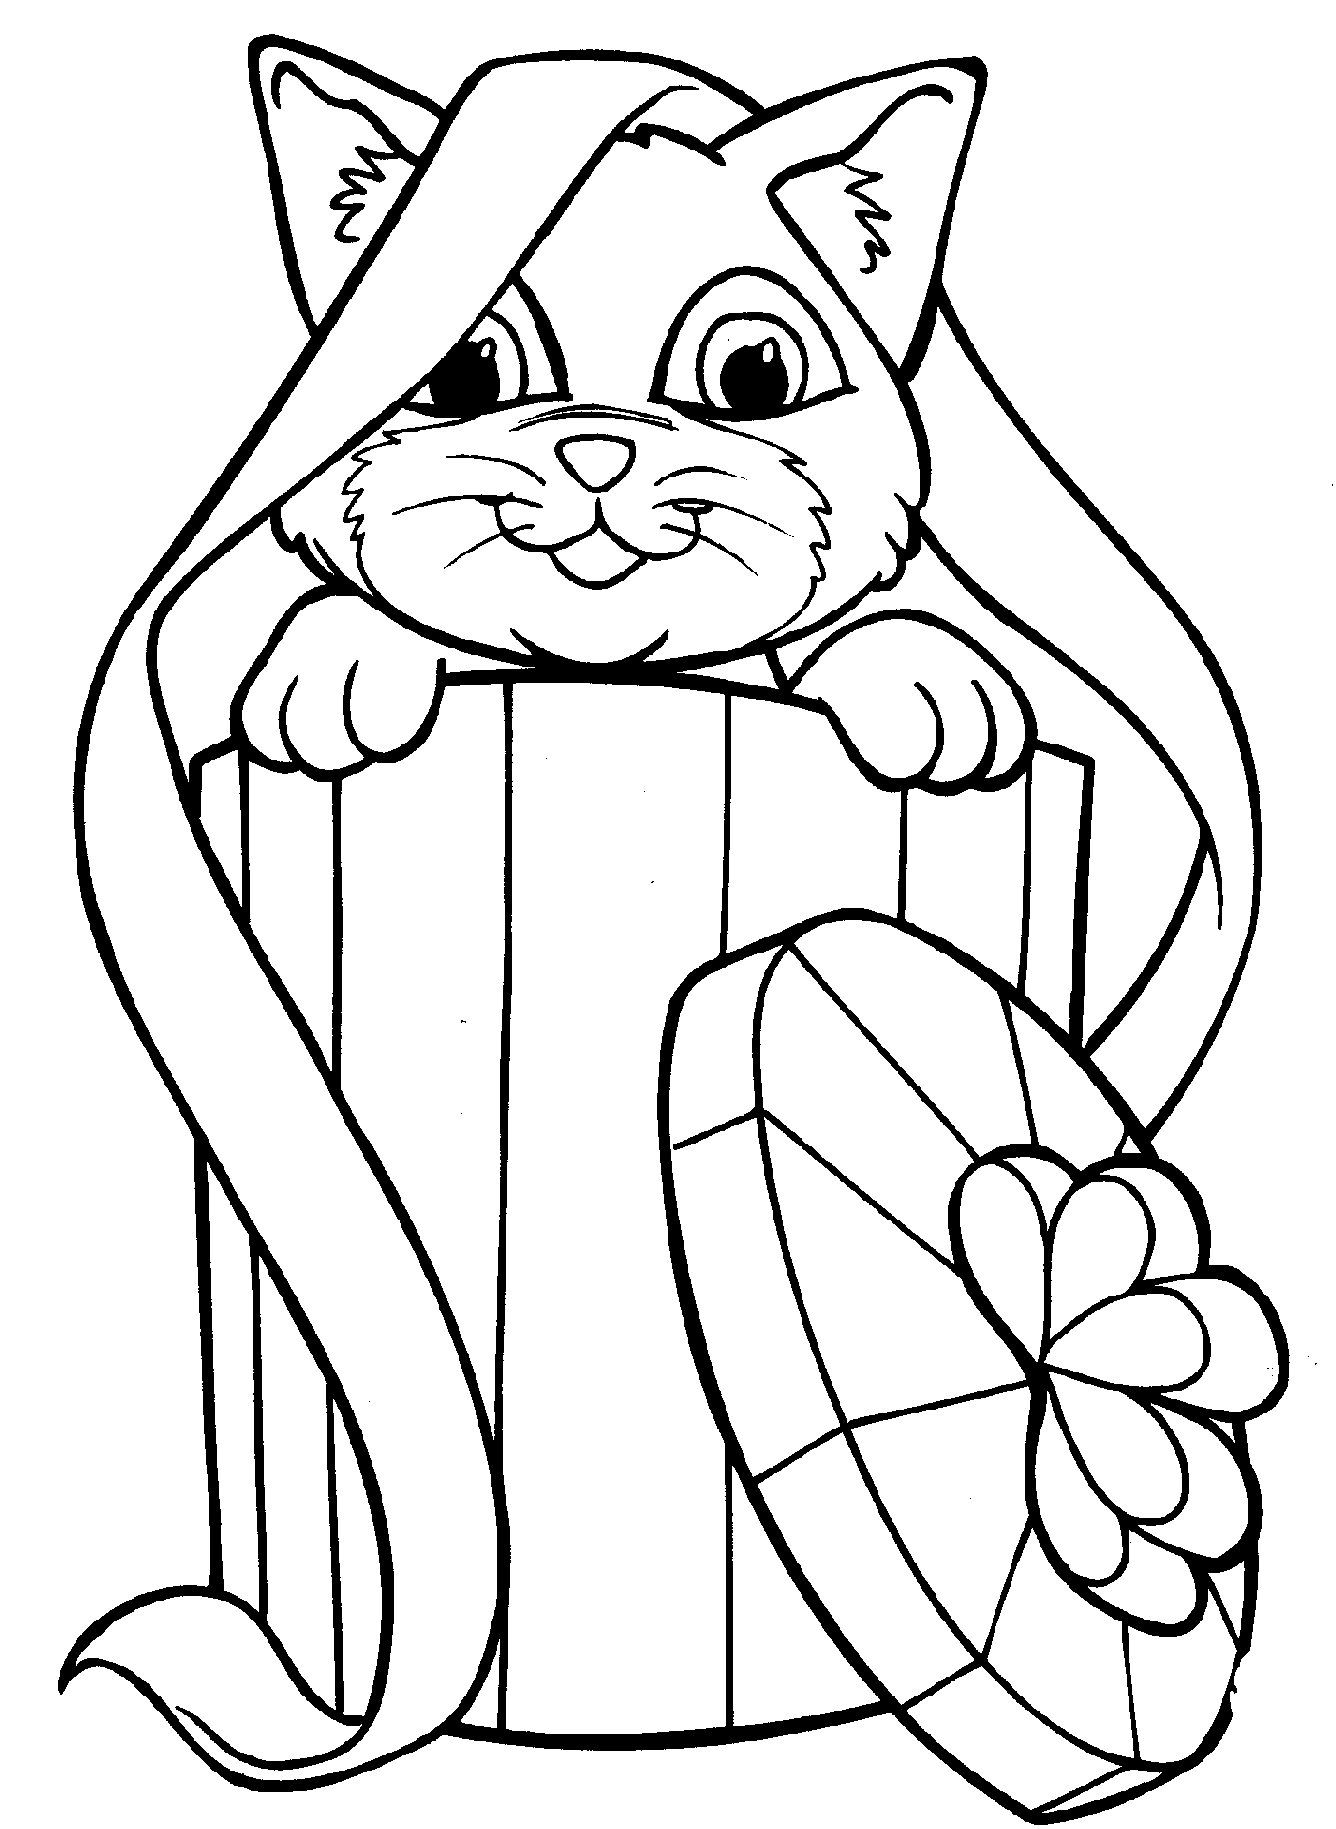 kitten color pages kitten coloring pages best coloring pages for kids kitten pages color 